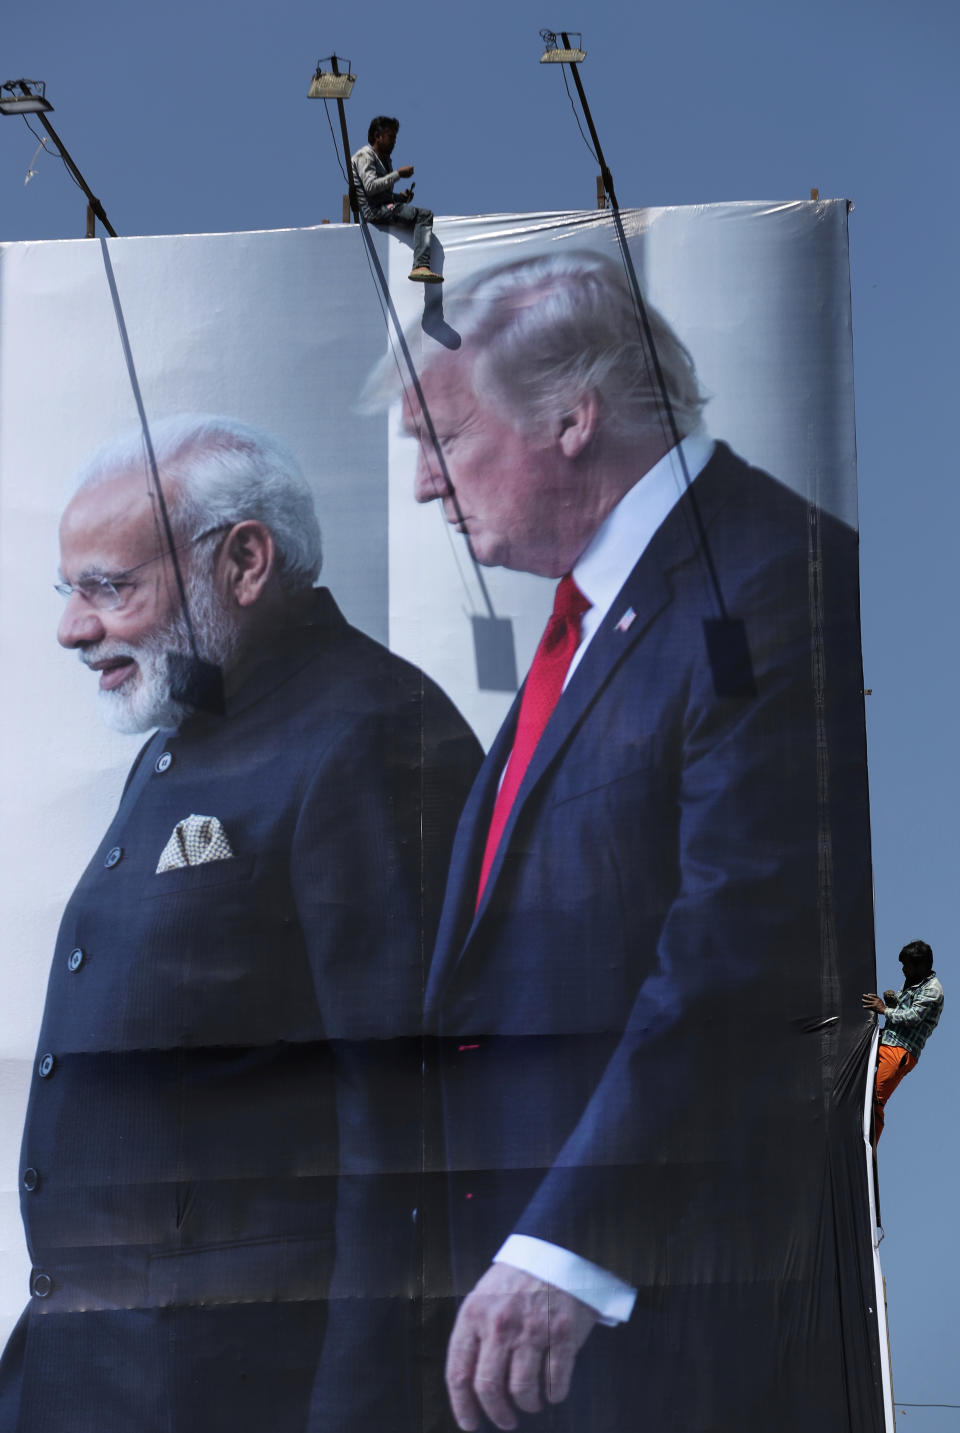 FILE - In this Feb. 20, 2020, file photo, workers install a giant hoarding welcoming U.S. President Donald Trump ahead of his visit, in Ahmedabad, India. To welcome Trump, who last year likened Modi to Elvis Presley for his crowd-pulling power at a rally in Houston, the Gujarat government has spent almost $14 million on ads blanketing the city that show the two leaders holding up their hands, flanked by the Indian and U.S. flags. It also scrambled to build a wall to hide a slum from the road Trump and first lady Melania Trump will travel, caught stray dogs, planted exotic trees and is rushing to finish a cricket stadium in time for Trump’s arrival. (AP Photo/Ajit Solanki, File)